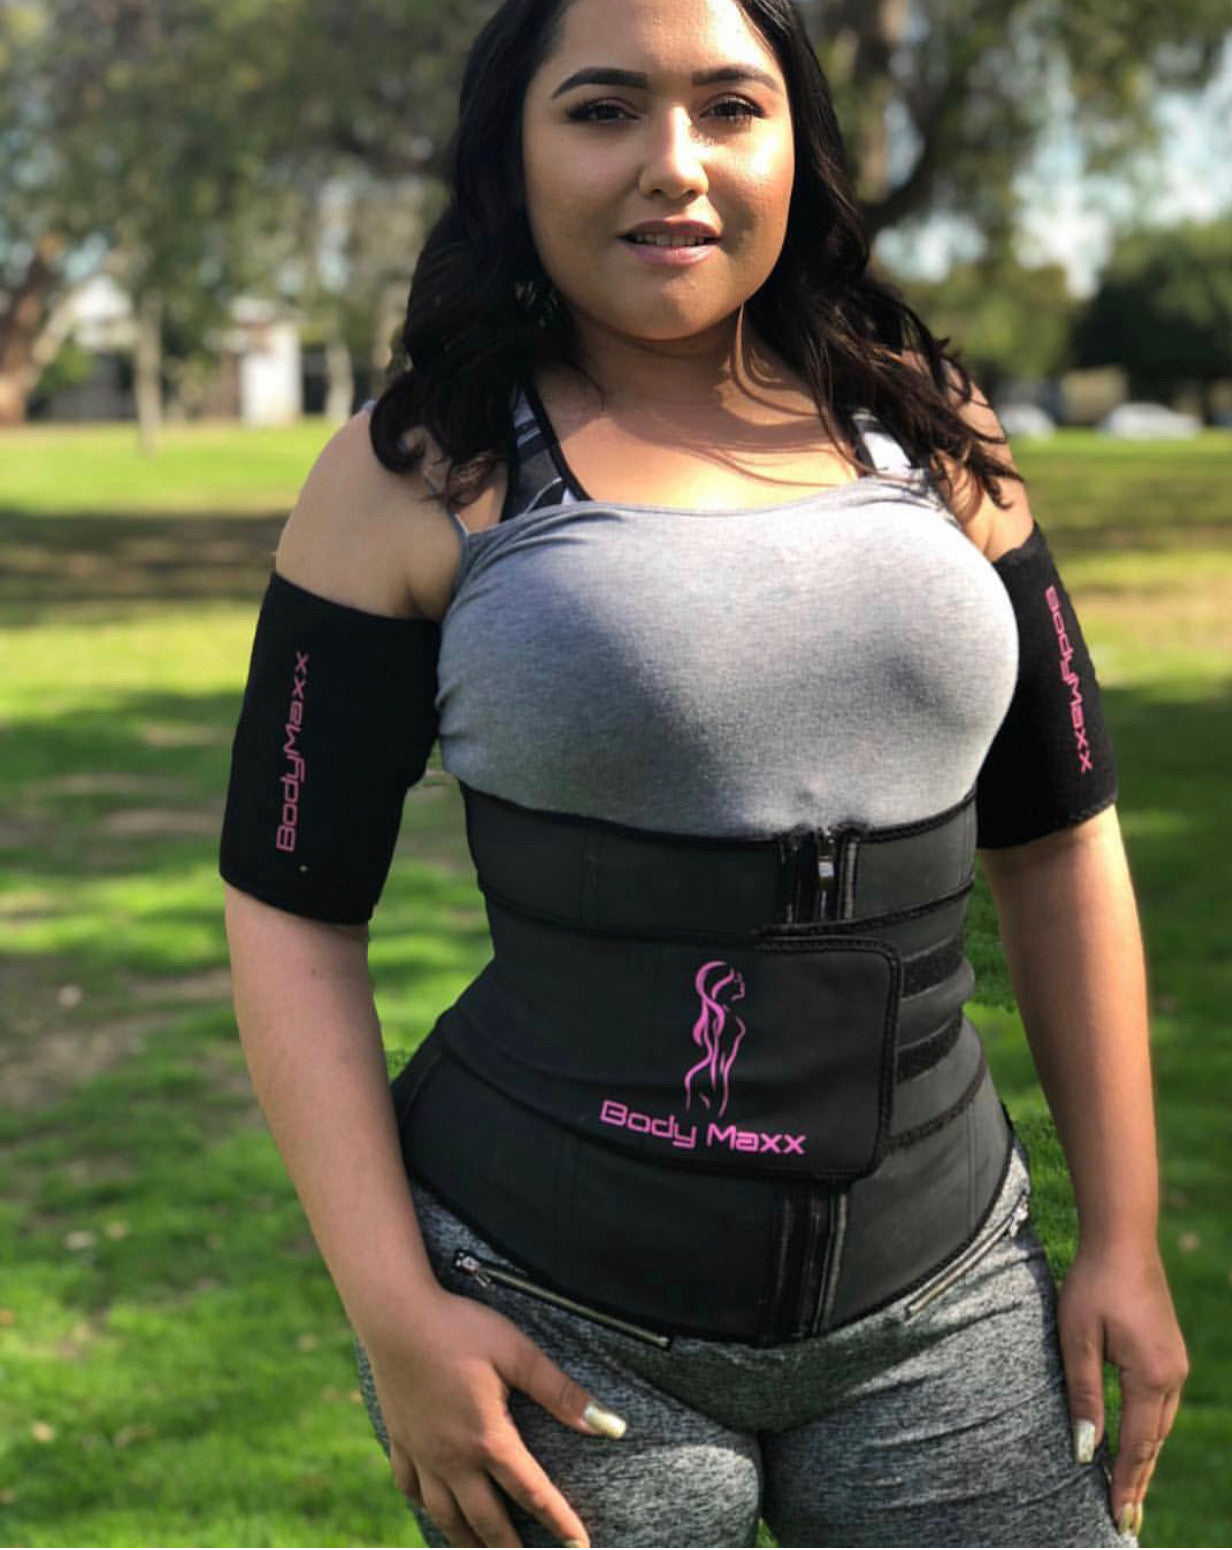 Do Waist Slimmers Work For Plus-Size Women